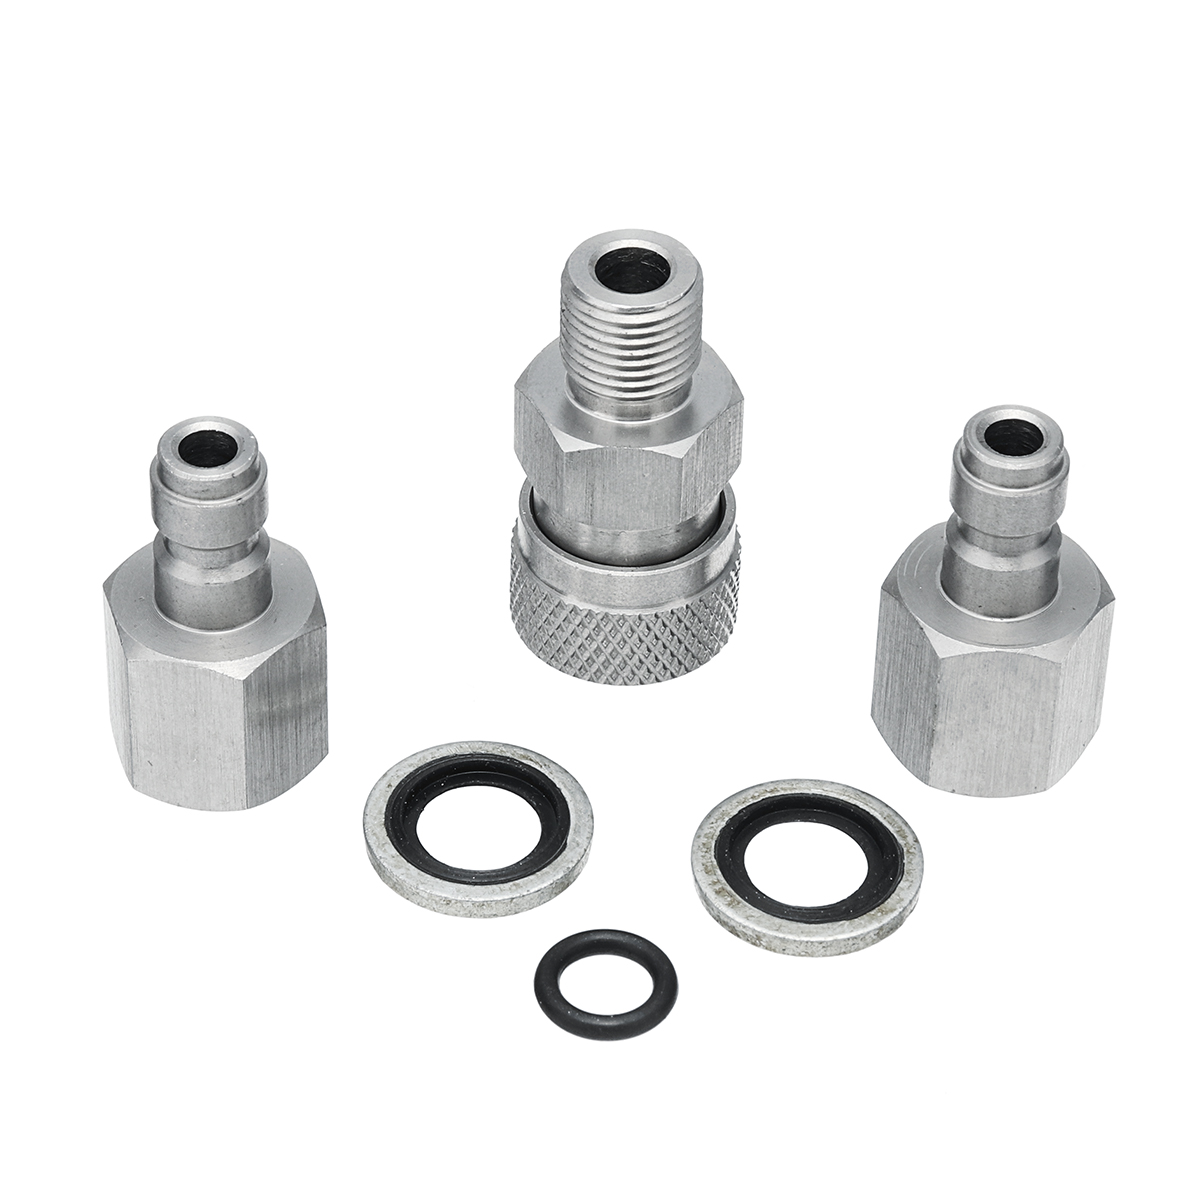 

Stainless PCP Air Gun Filling Quick Connect Adapter 1/8 BSPP With Plugs Fitting Connector Coupler